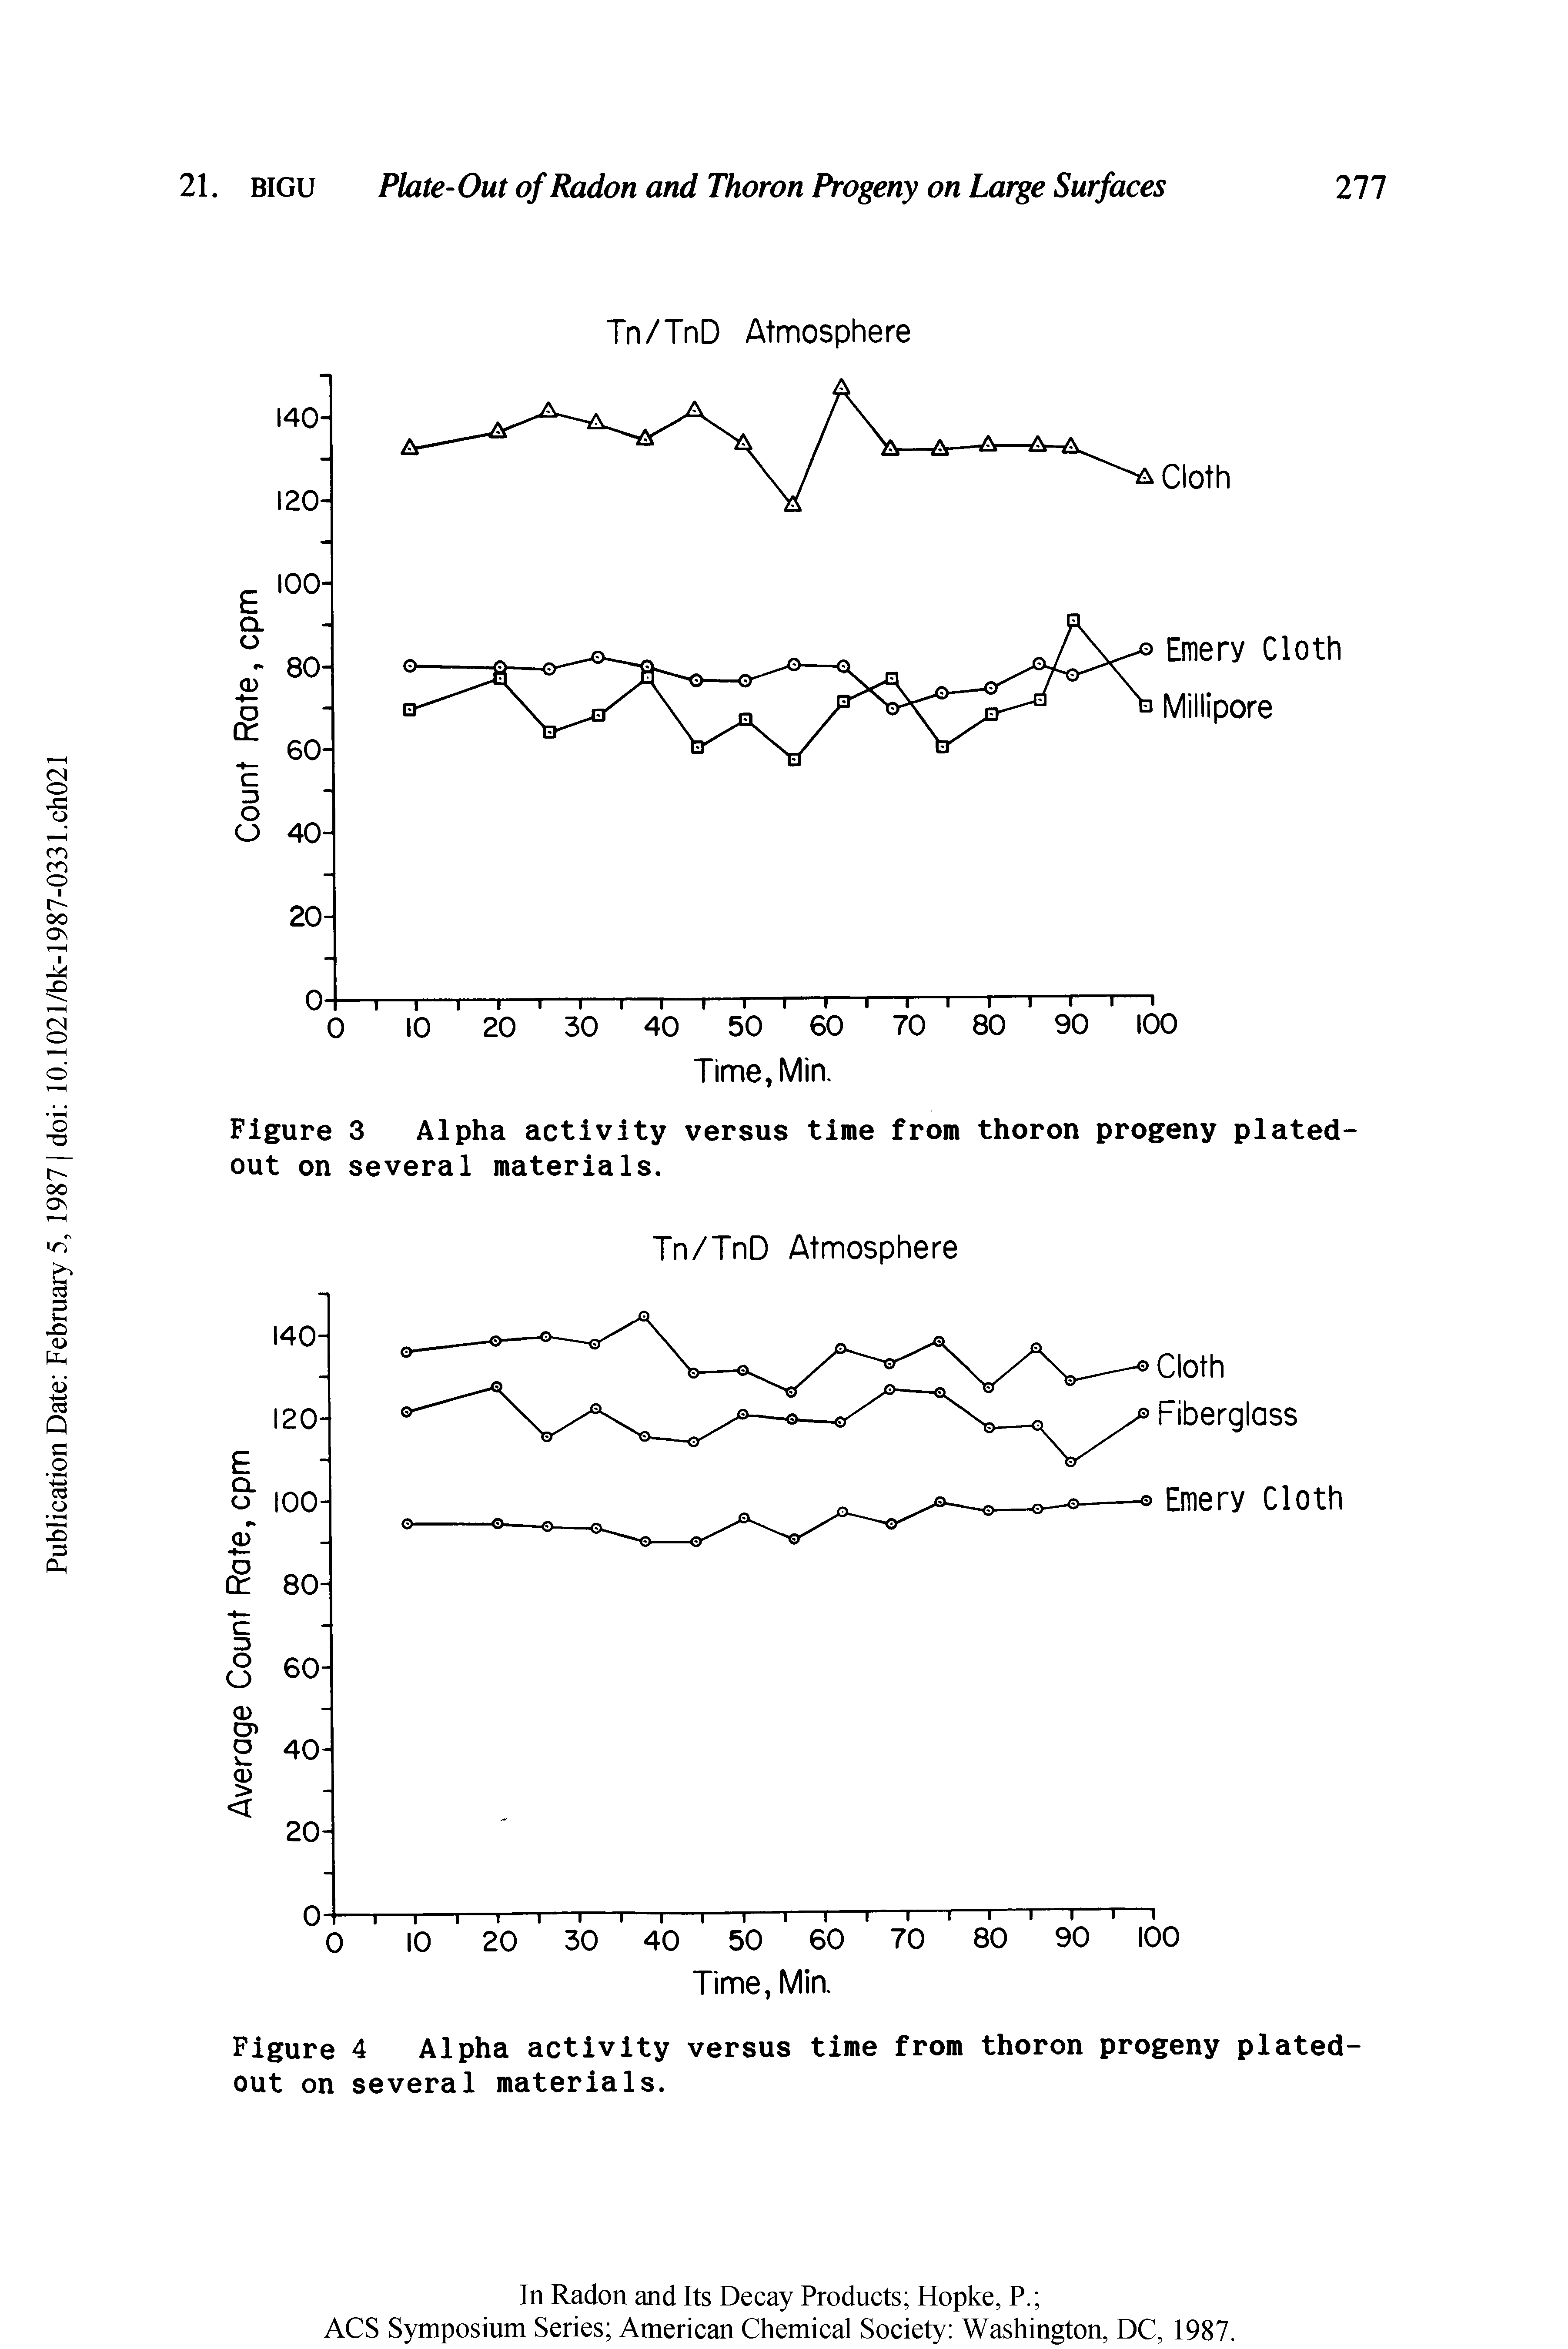 Figure 3 Alpha activity versus time from thoron progeny plated-out on several materials.